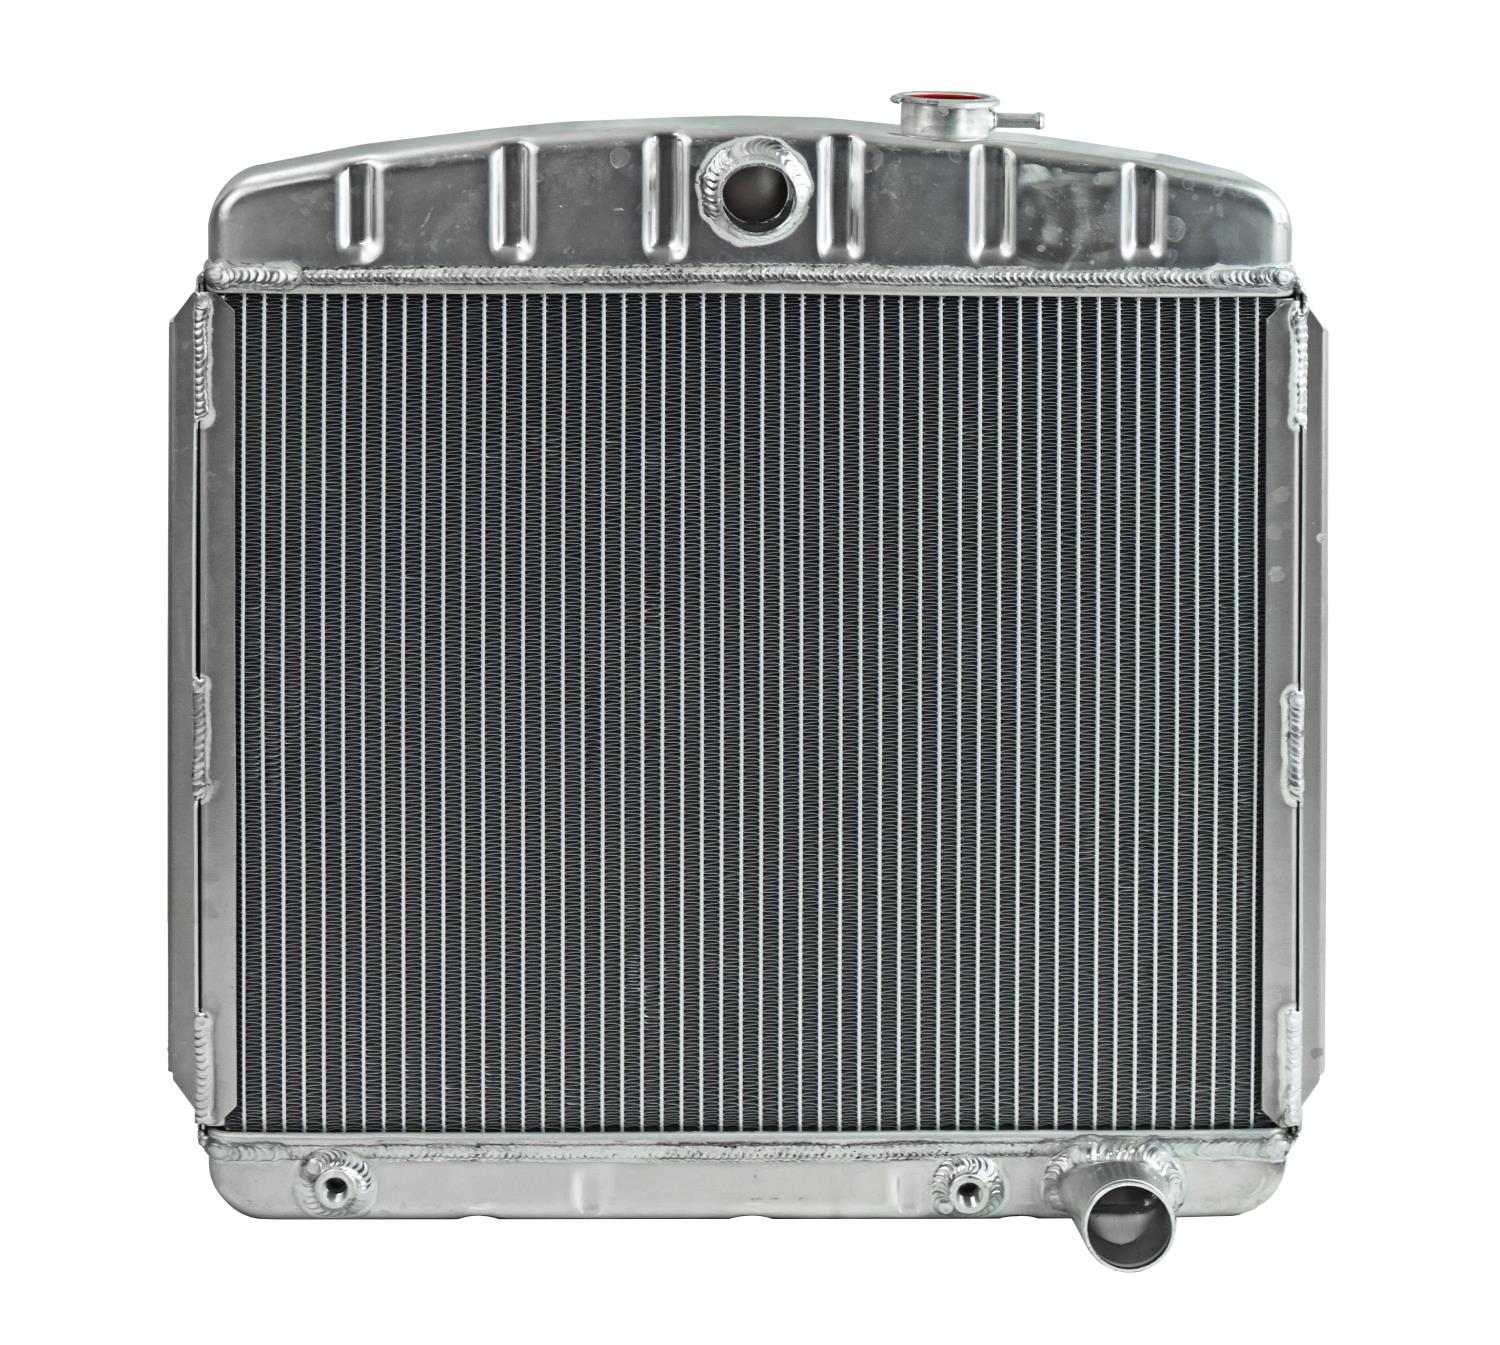 Reproduction Aluminum Radiator for 1955-1957 Chevrolet with V8 Engine